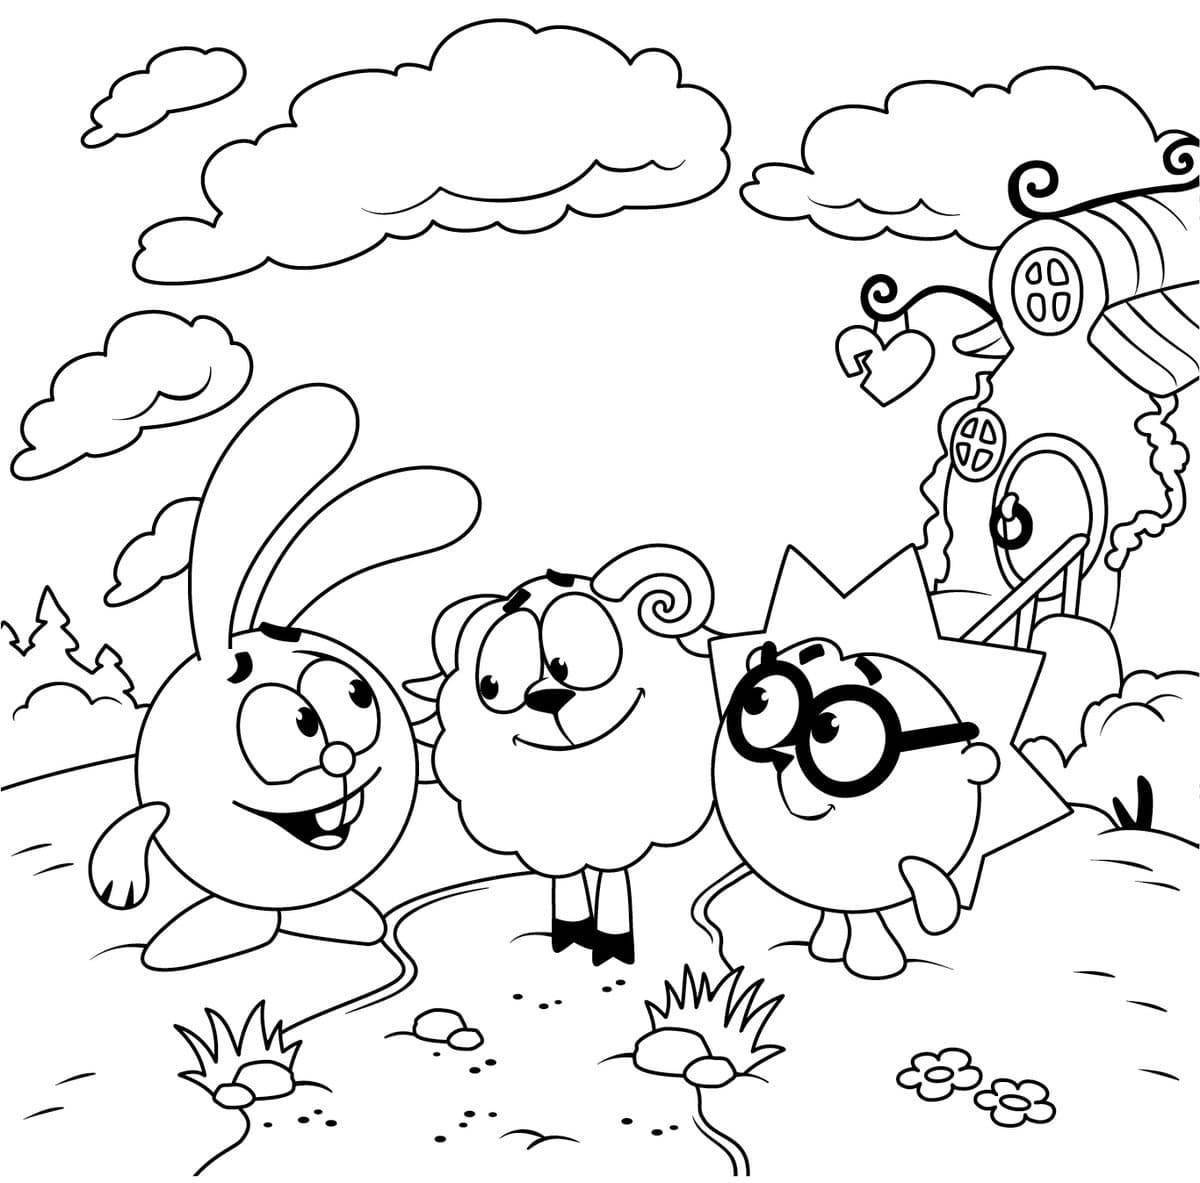 Colorful Smeshariki coloring pages for children